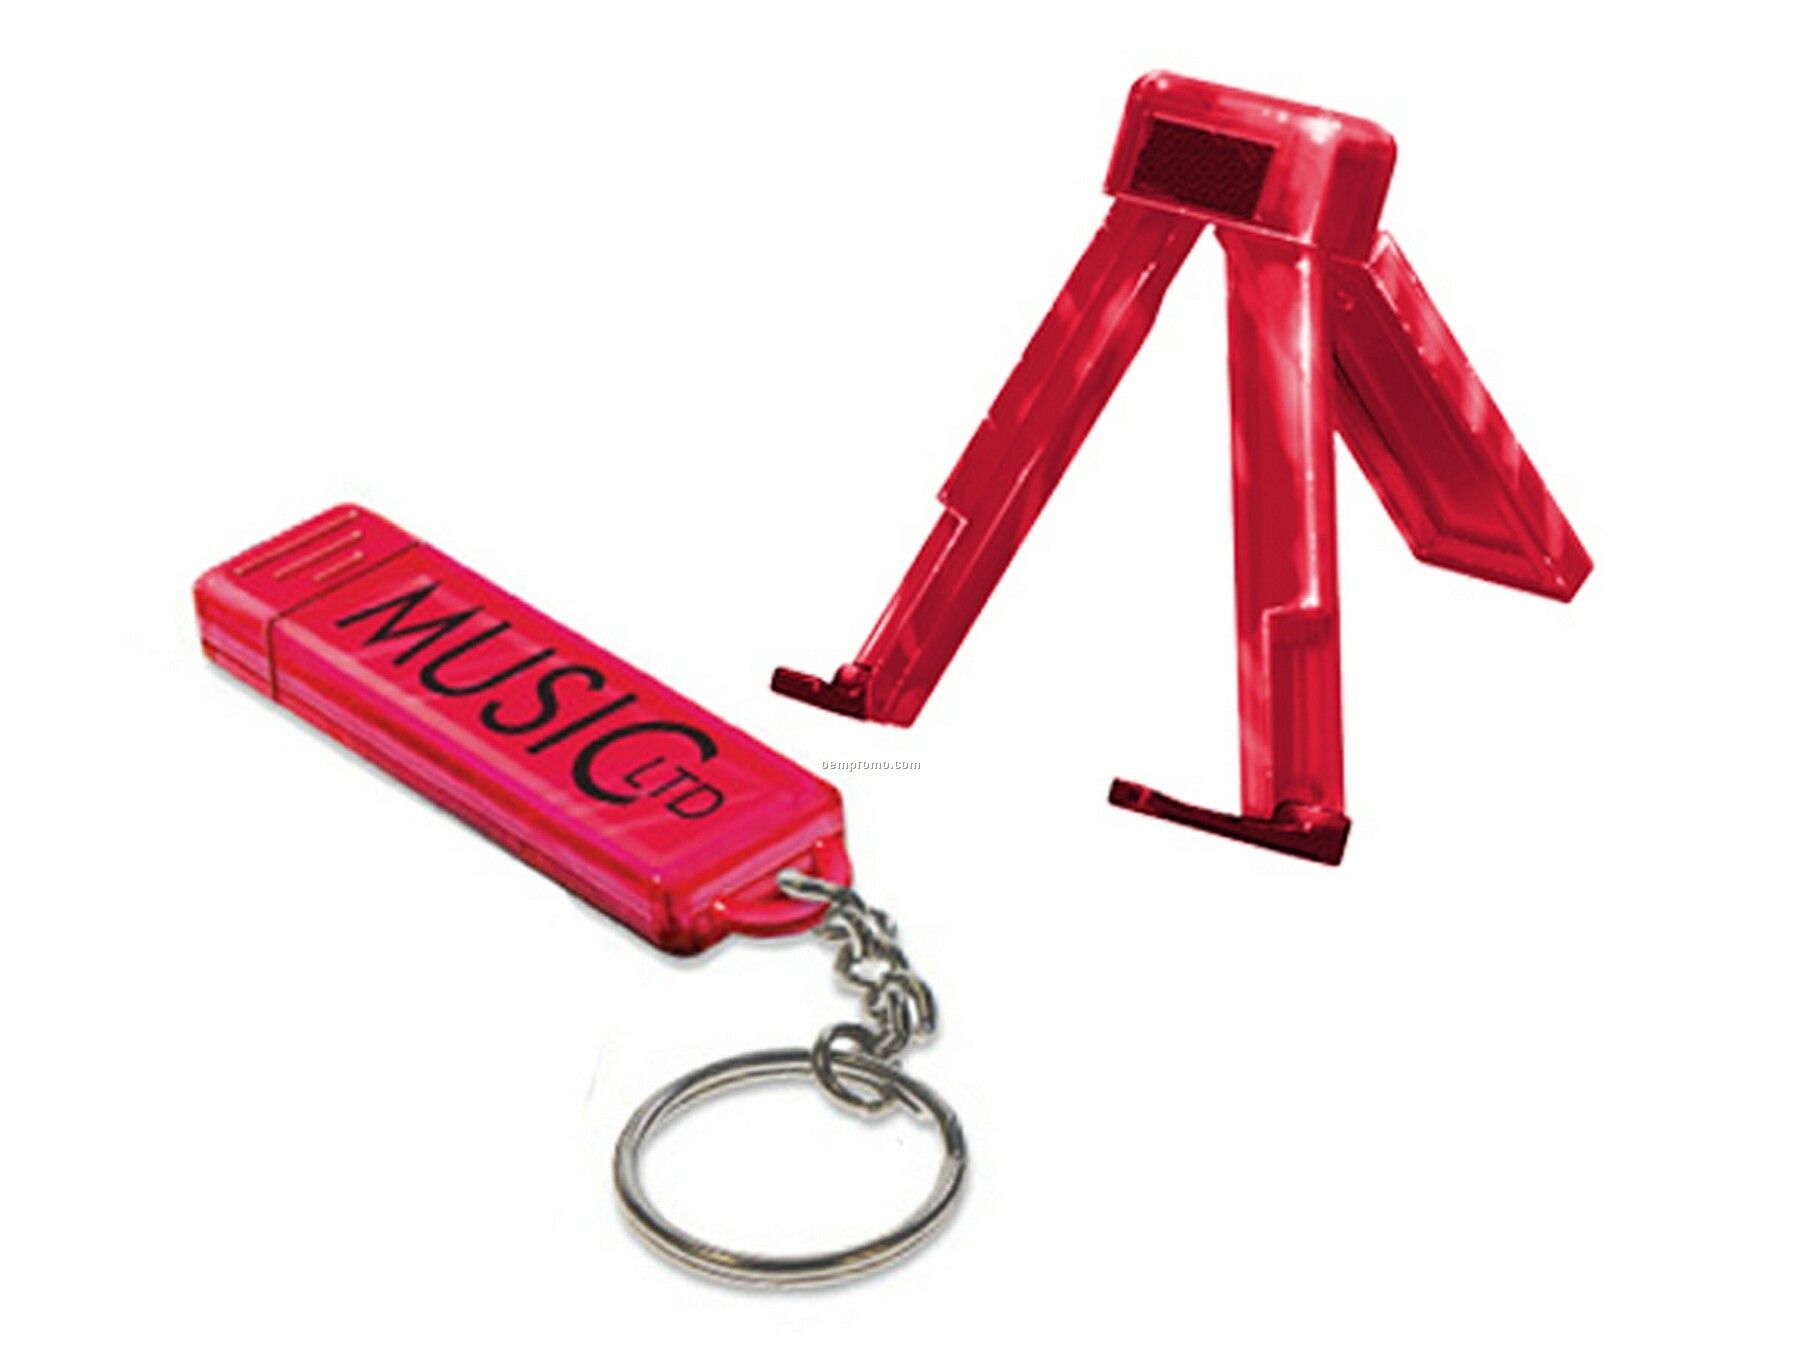 Tripod Stand Keychain For Phones And Mp3 Players